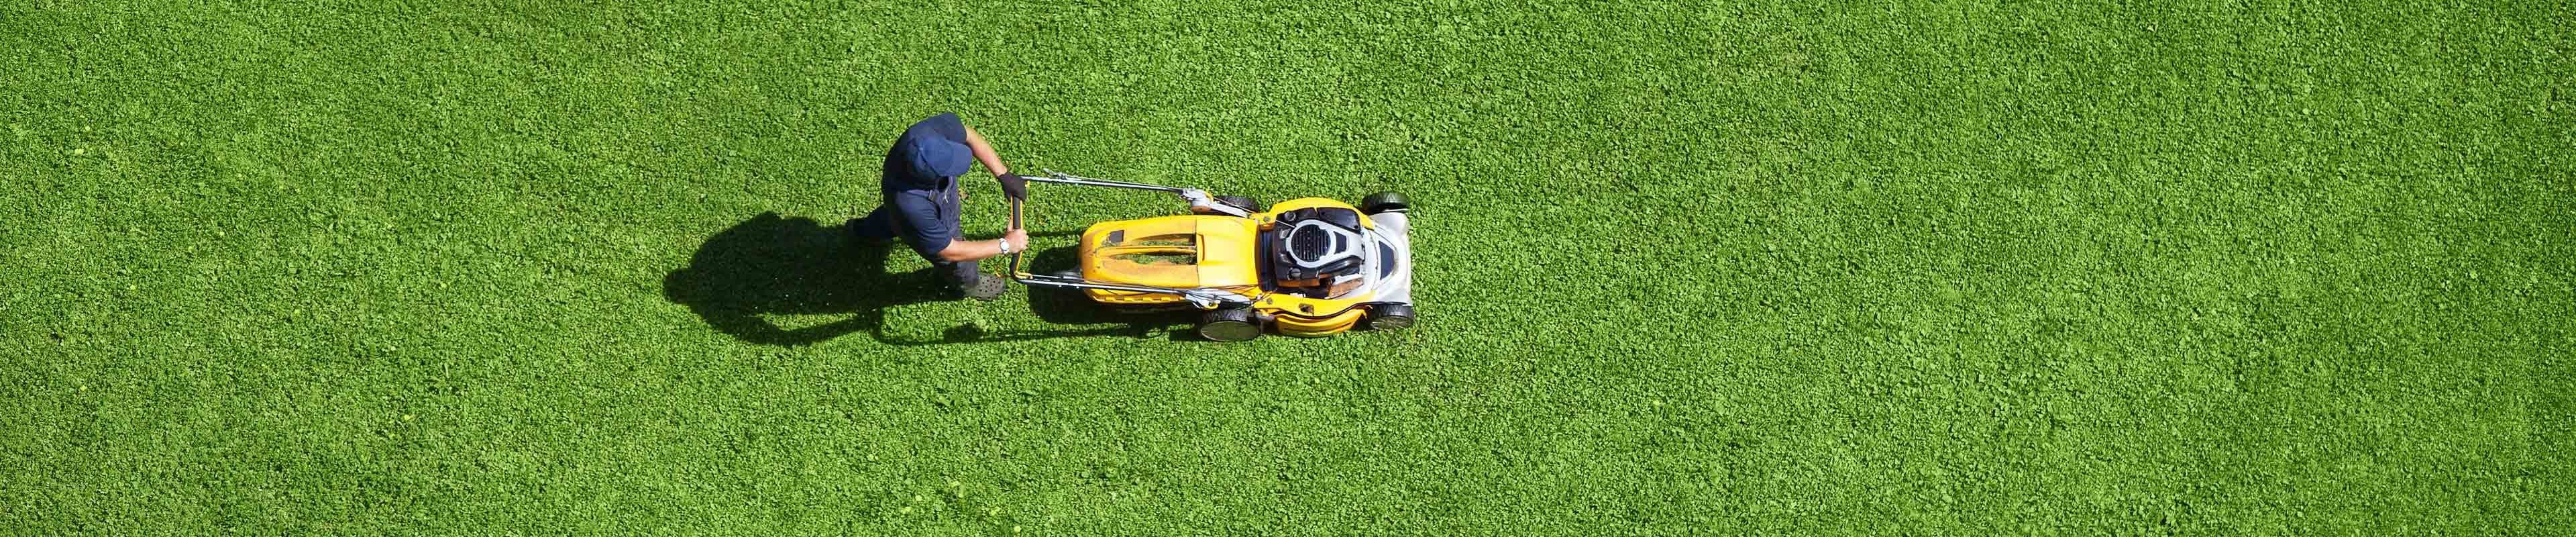 Image of a man mowing a lawn.